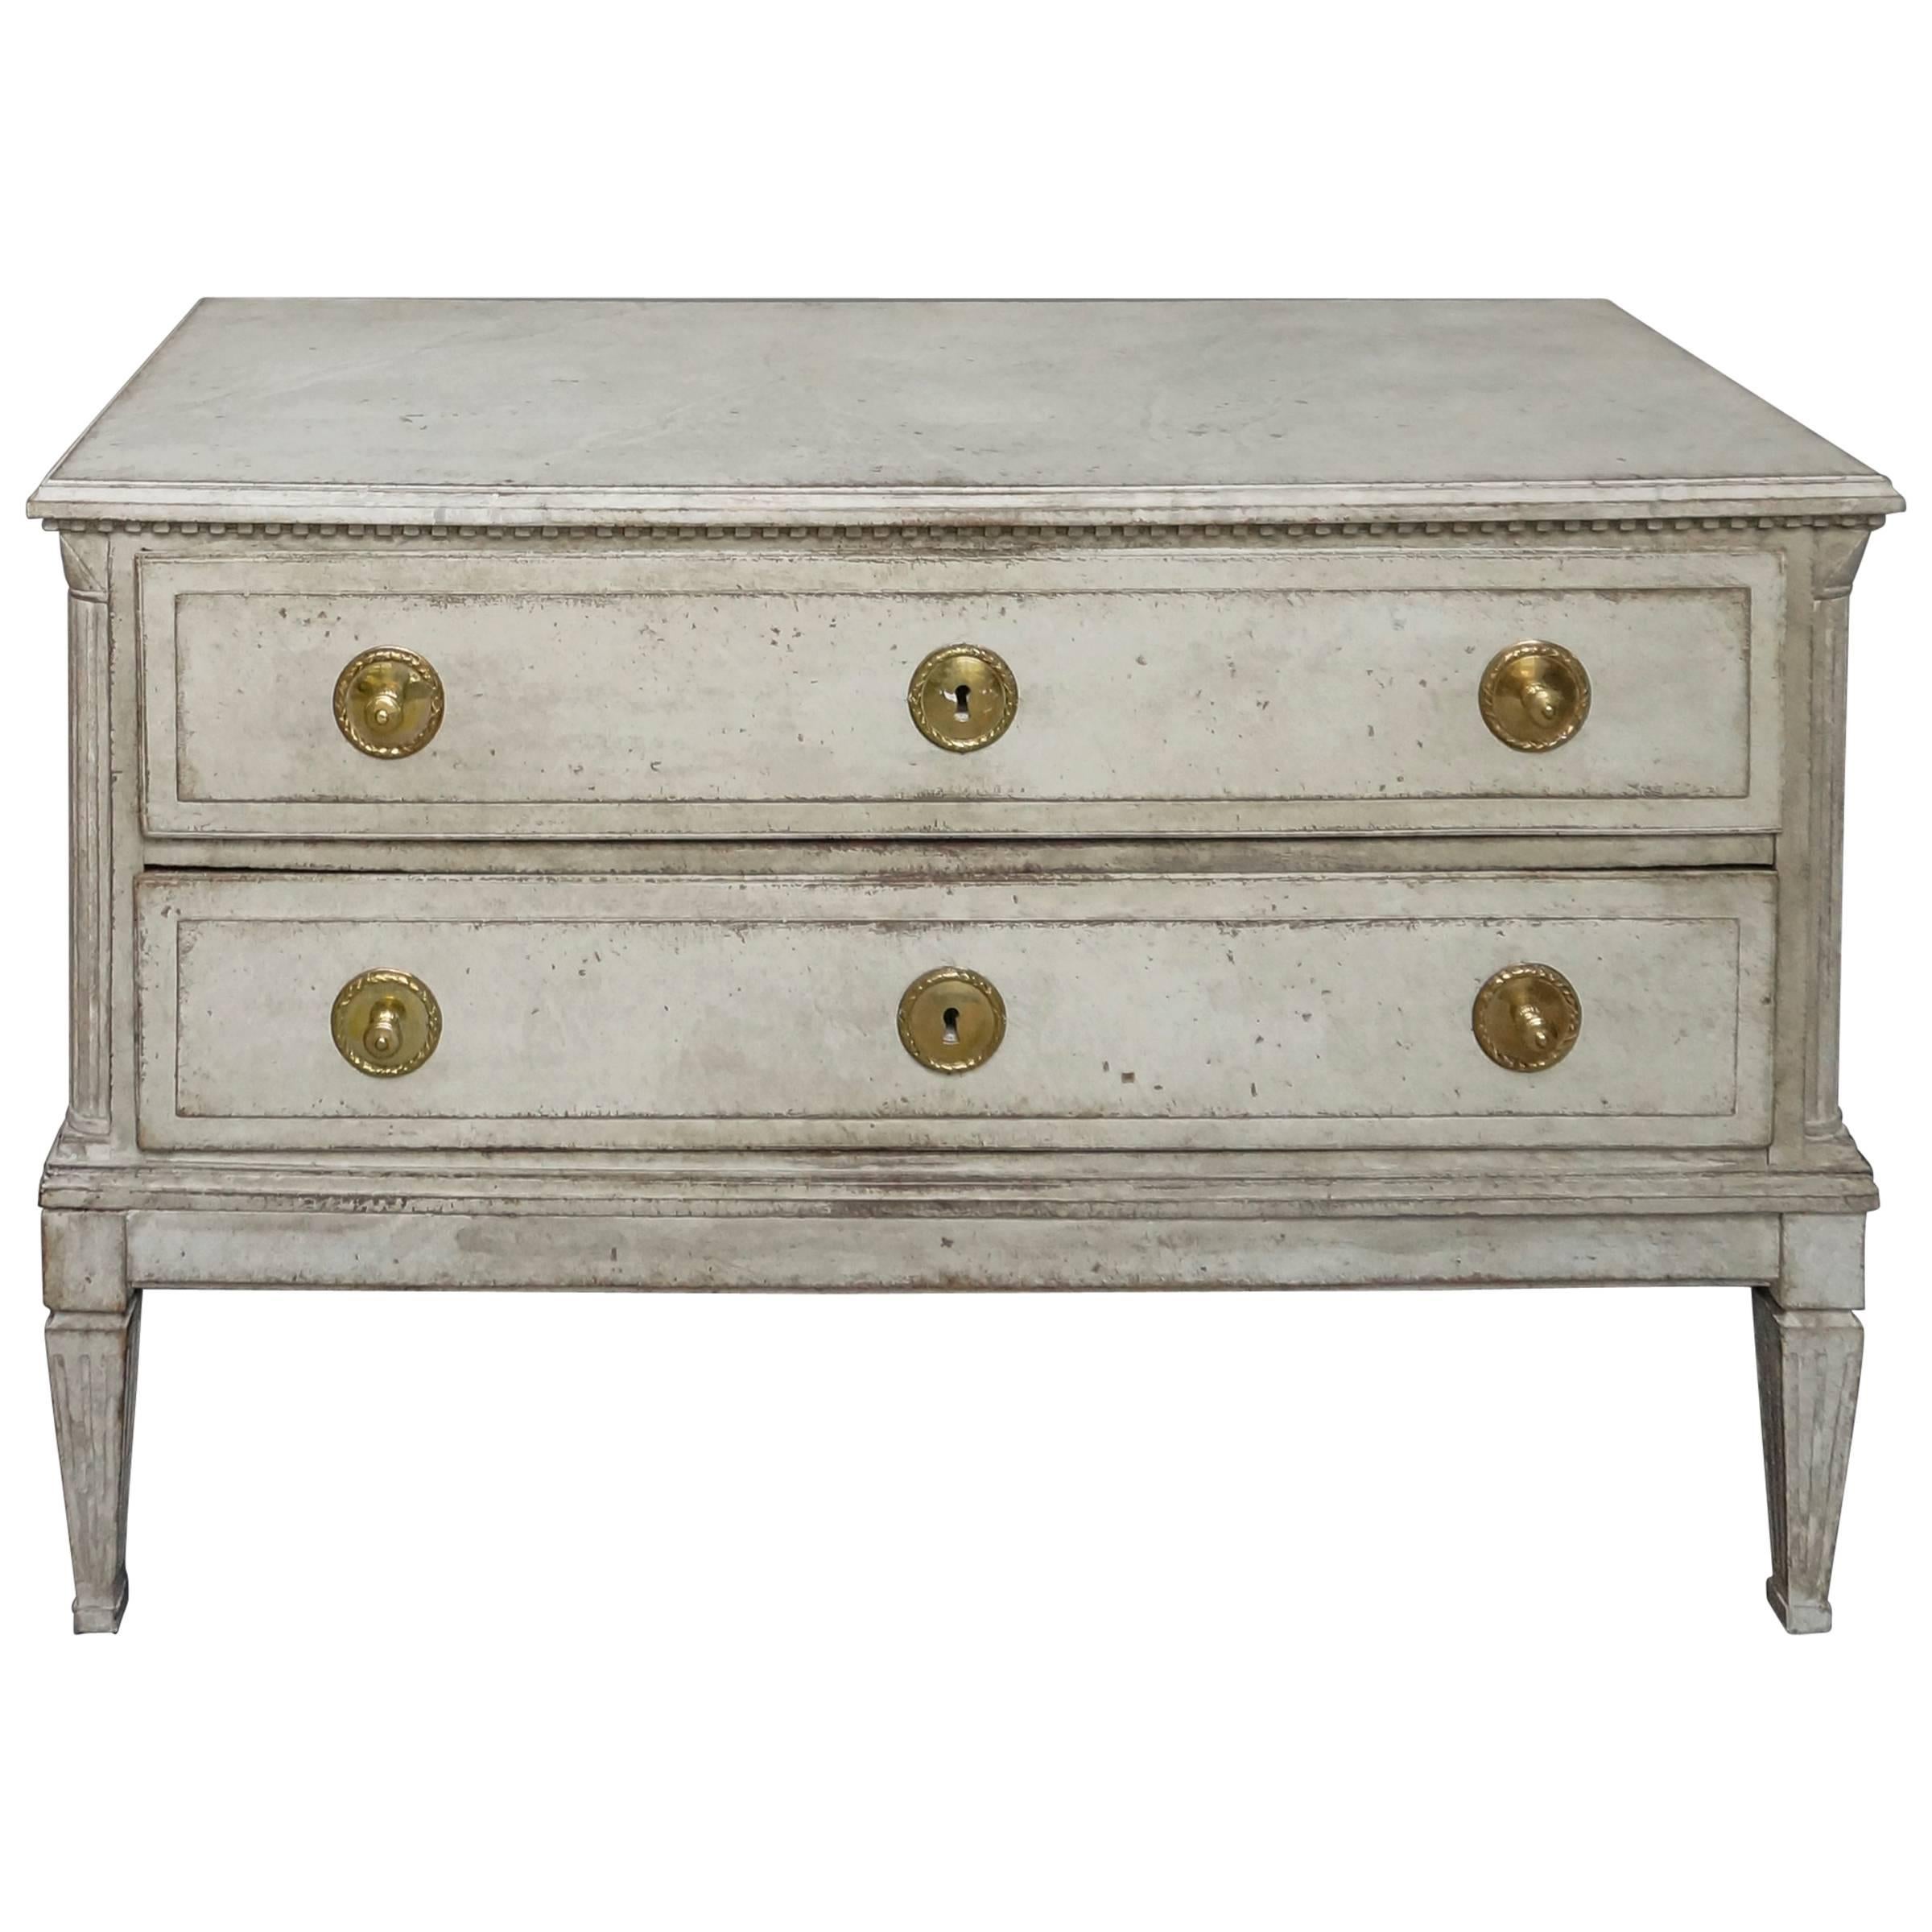 Period Neoclassical Two-Drawer Chest For Sale